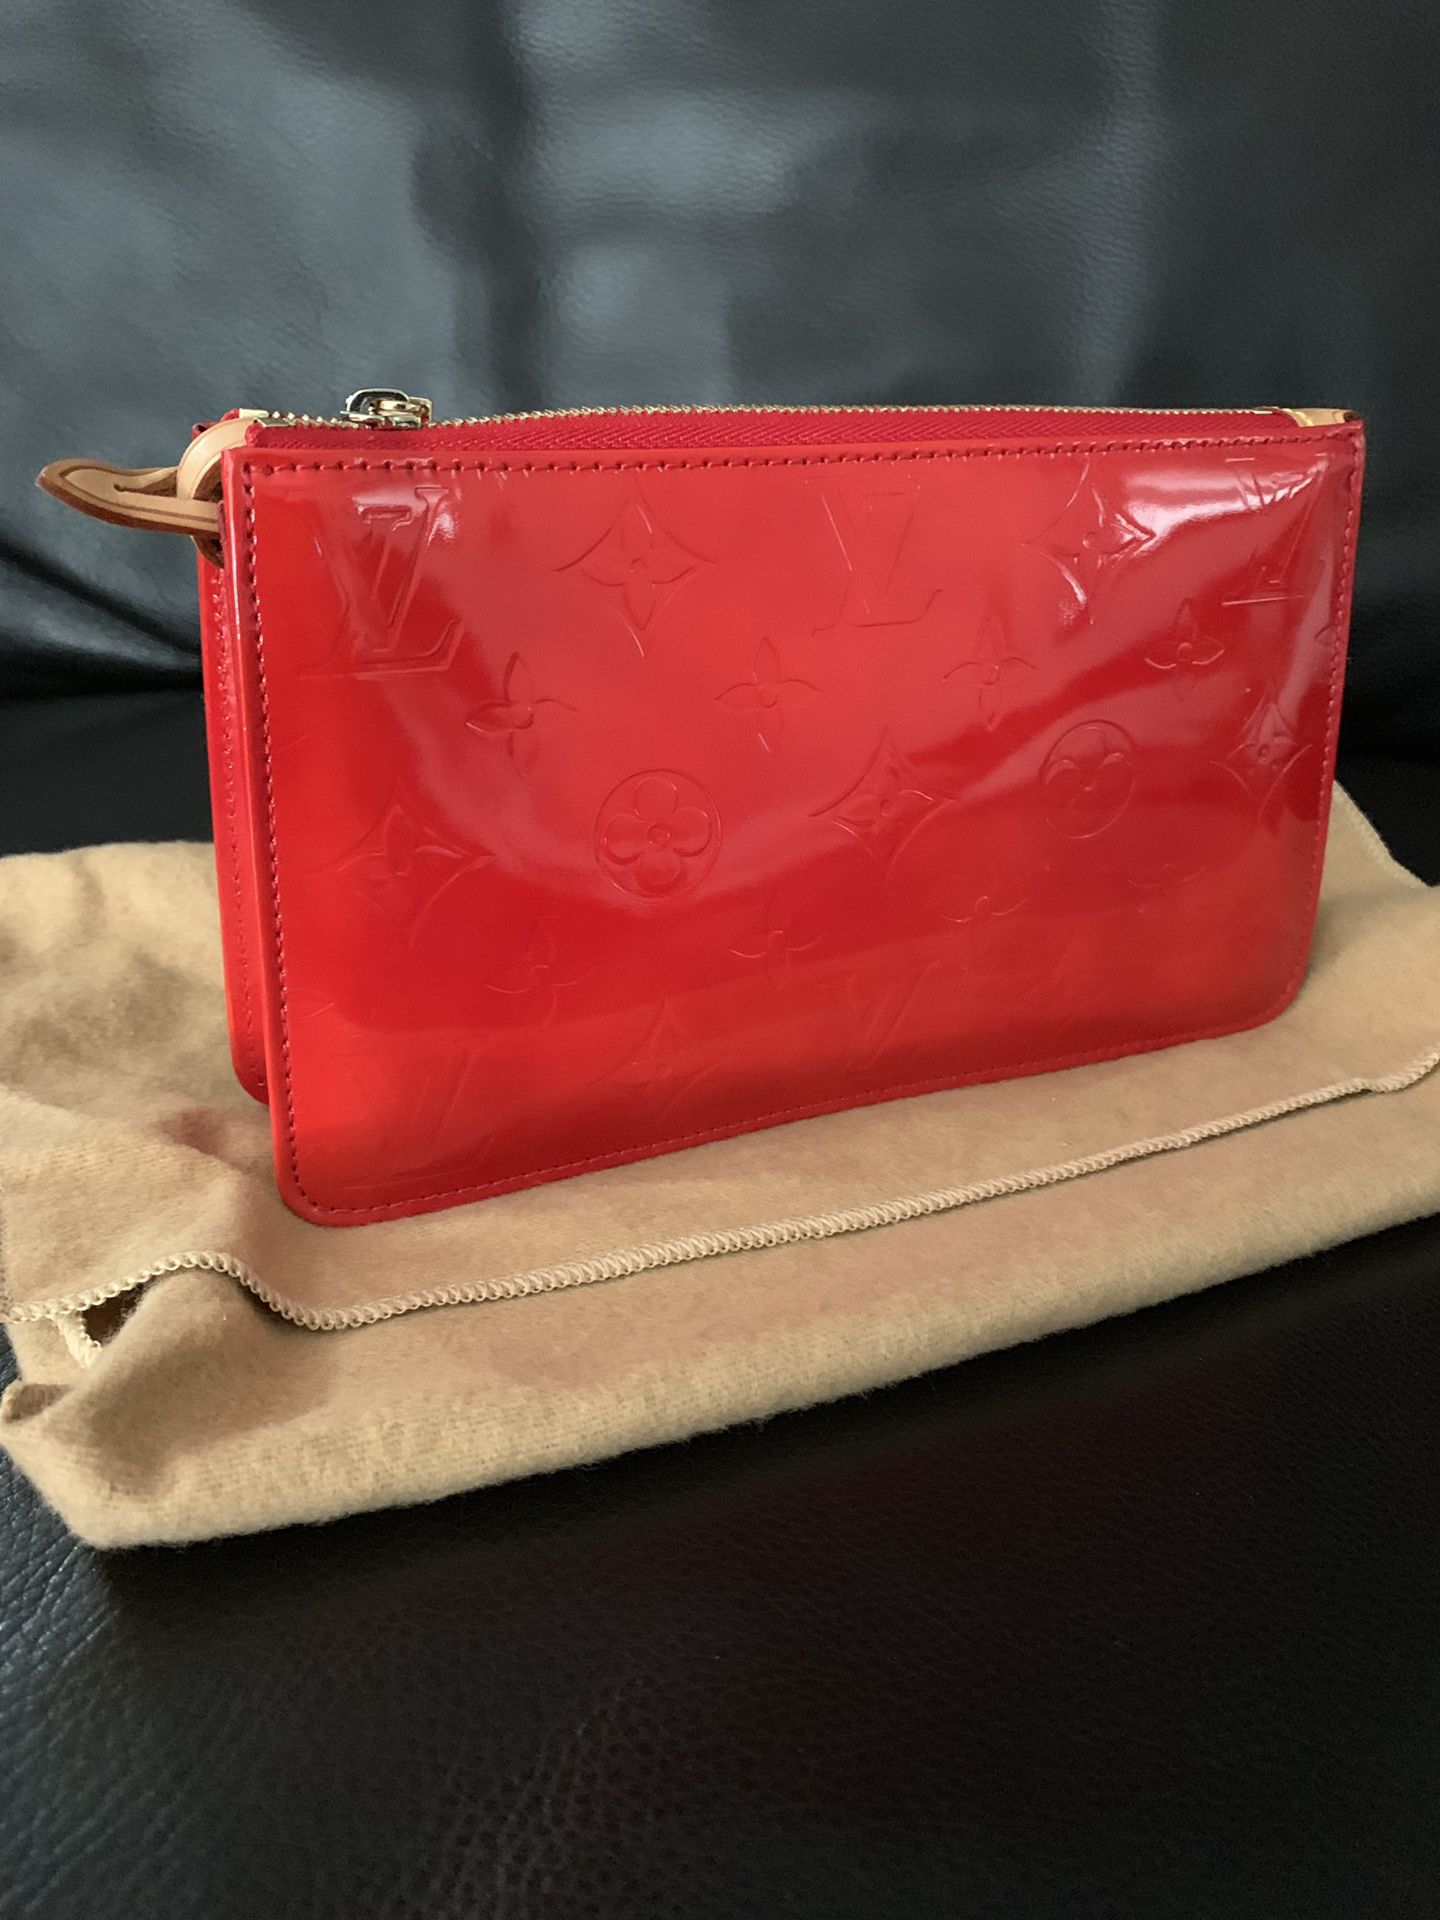 Louis Vuitton Lexington red vernis - Authentic and Brand New for